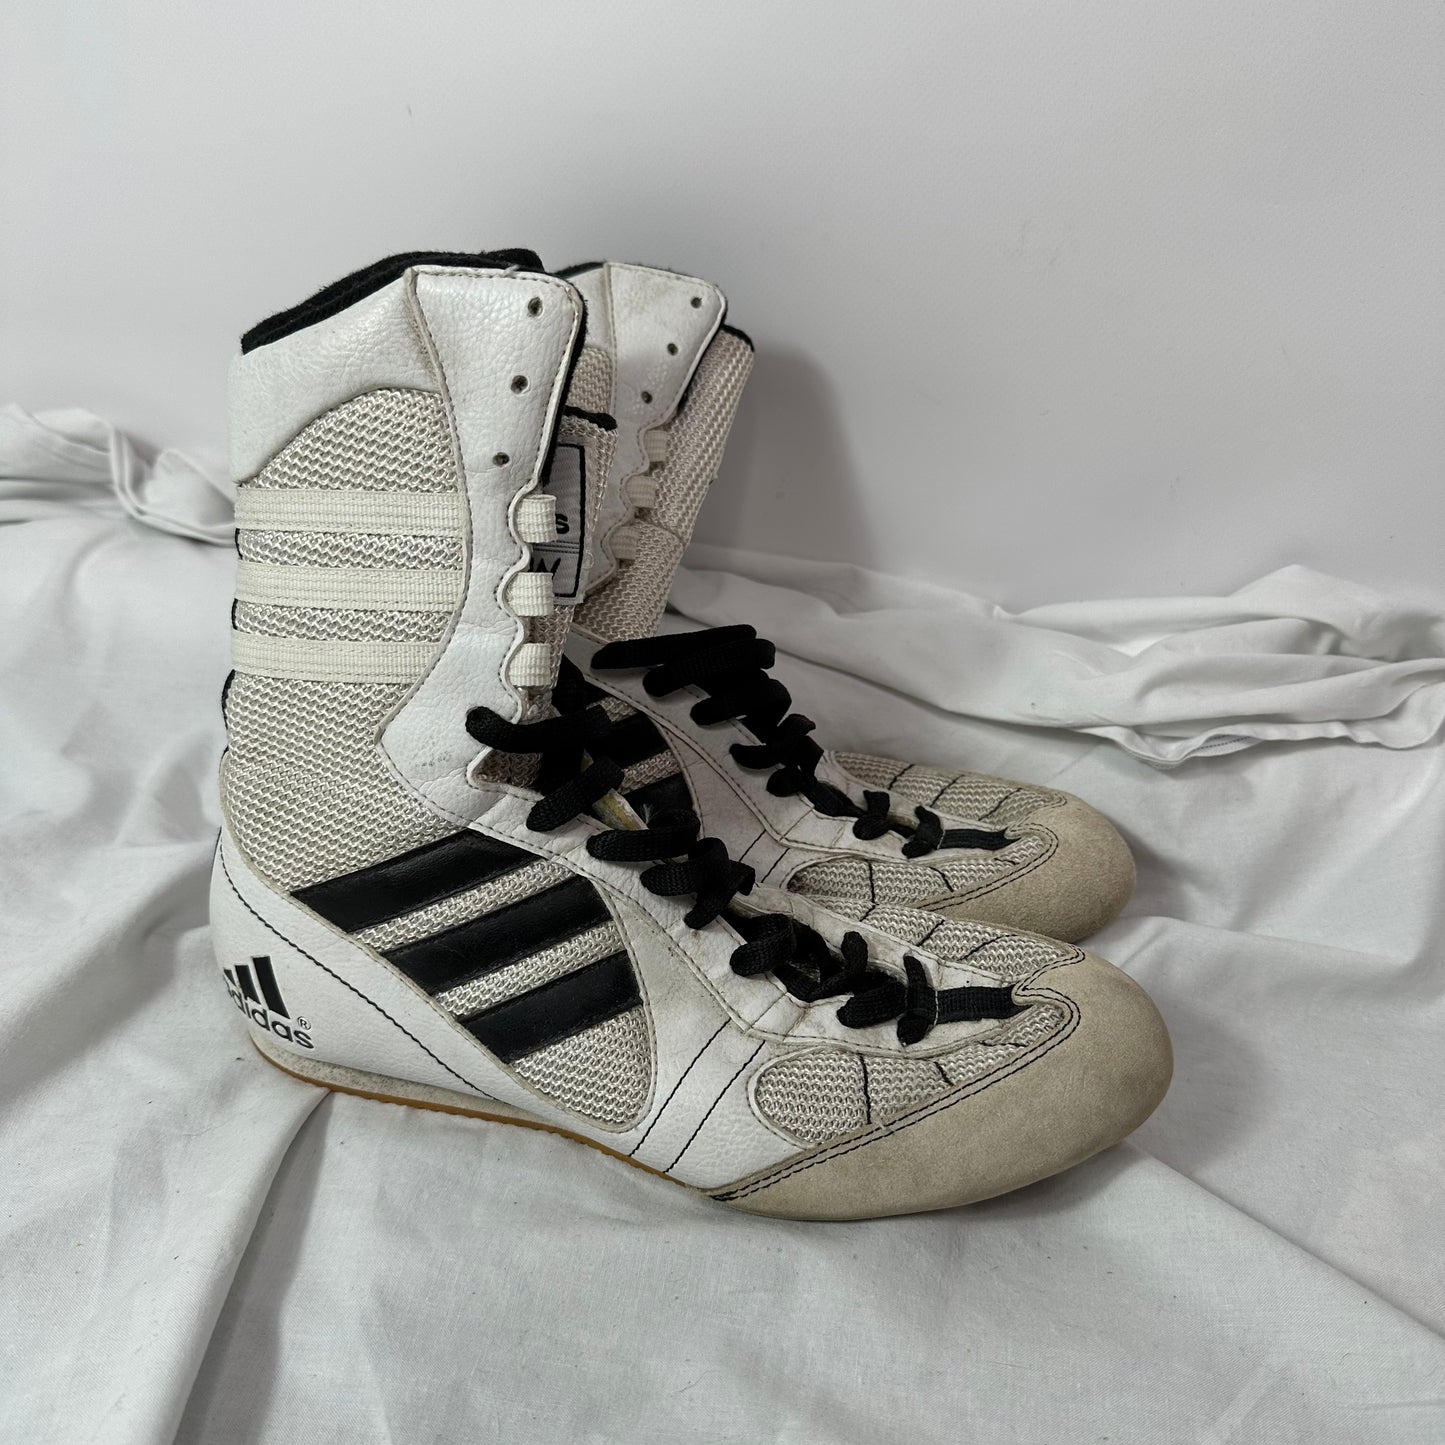 Adidas 2000s boxing boots